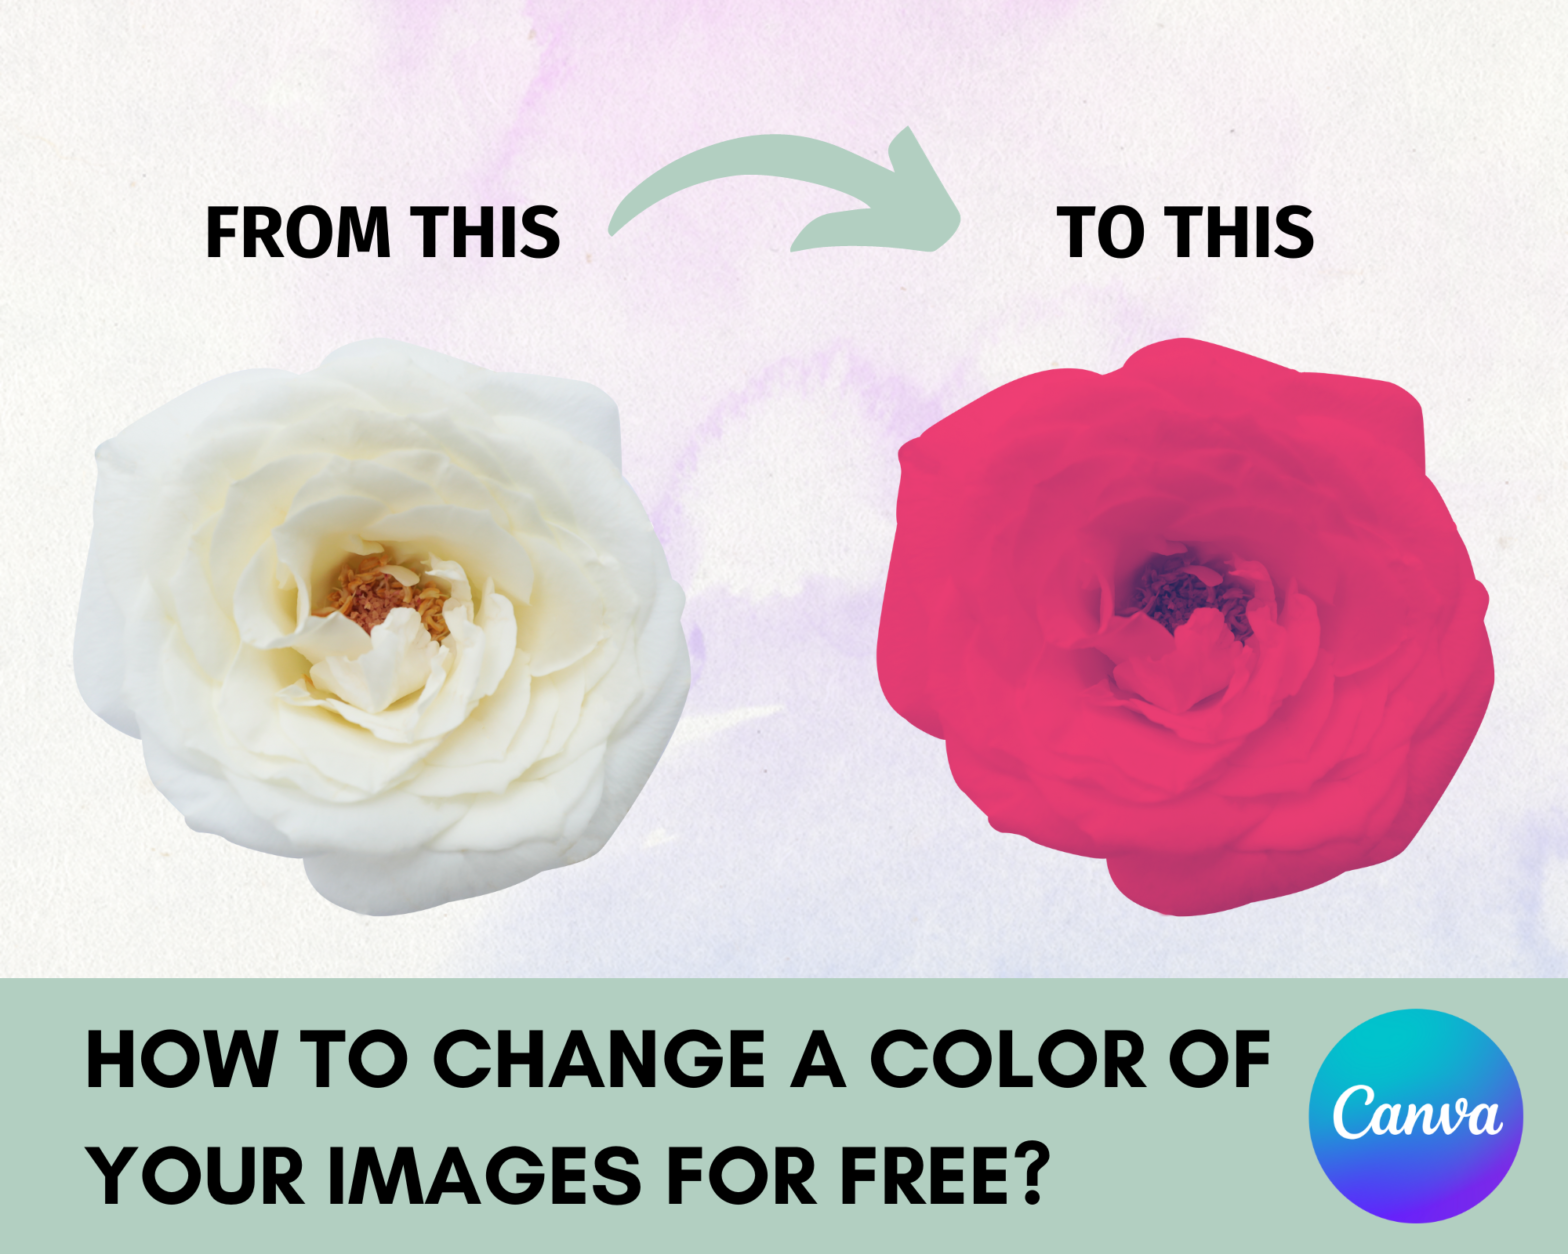 Thumbnail showing how a Canva user change change a image or graphics colors effortlessly in Canva through the color-changing Duotone process on an image for free.